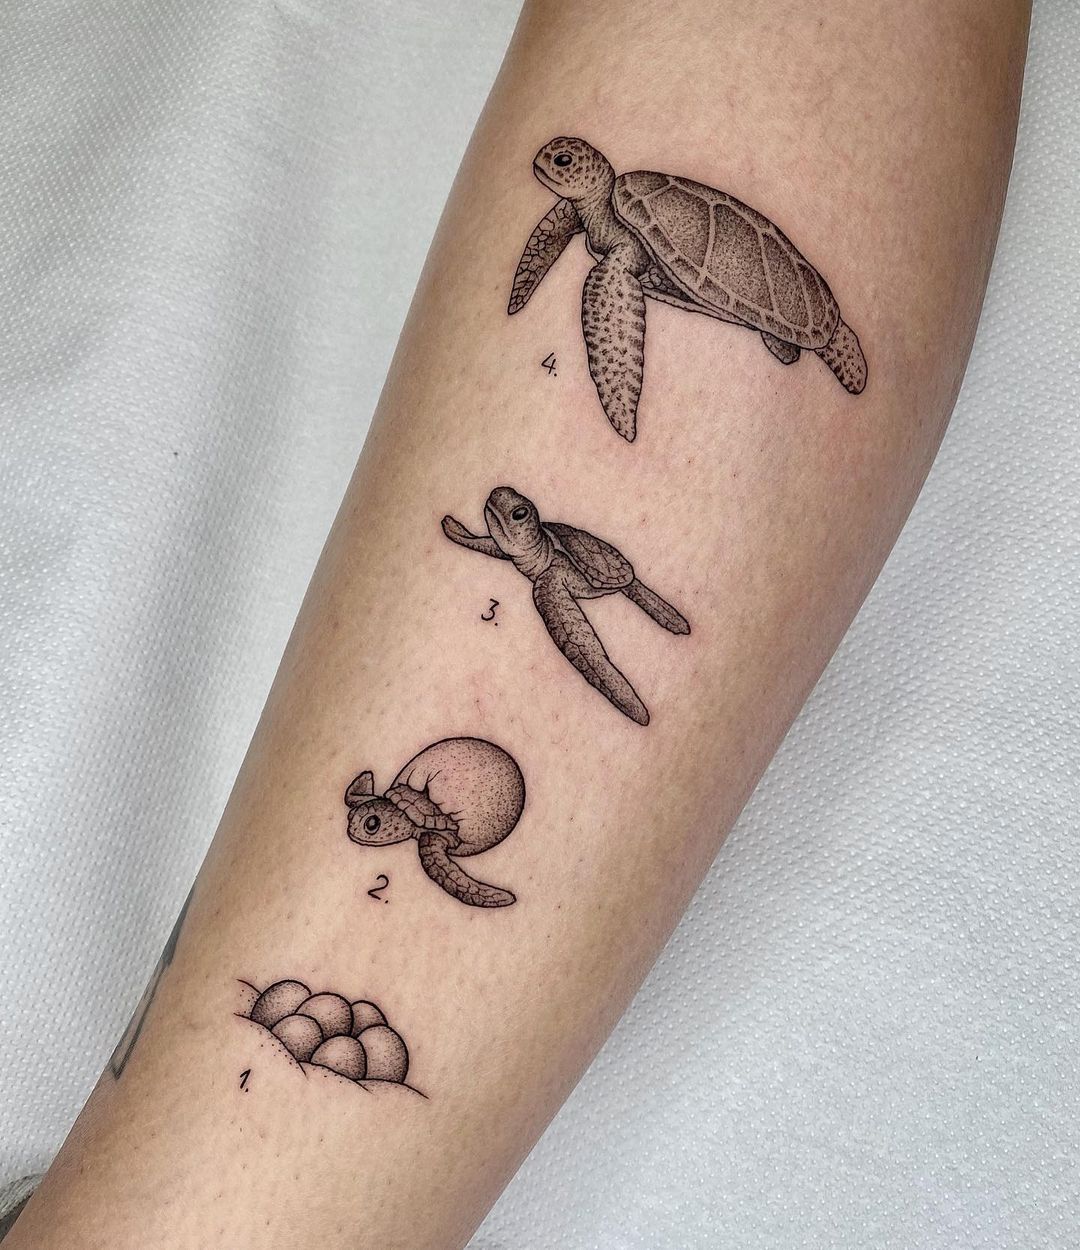 🔥 🔥 Animal Tattoo Meanings 🔥 🔥 [+50 guide]